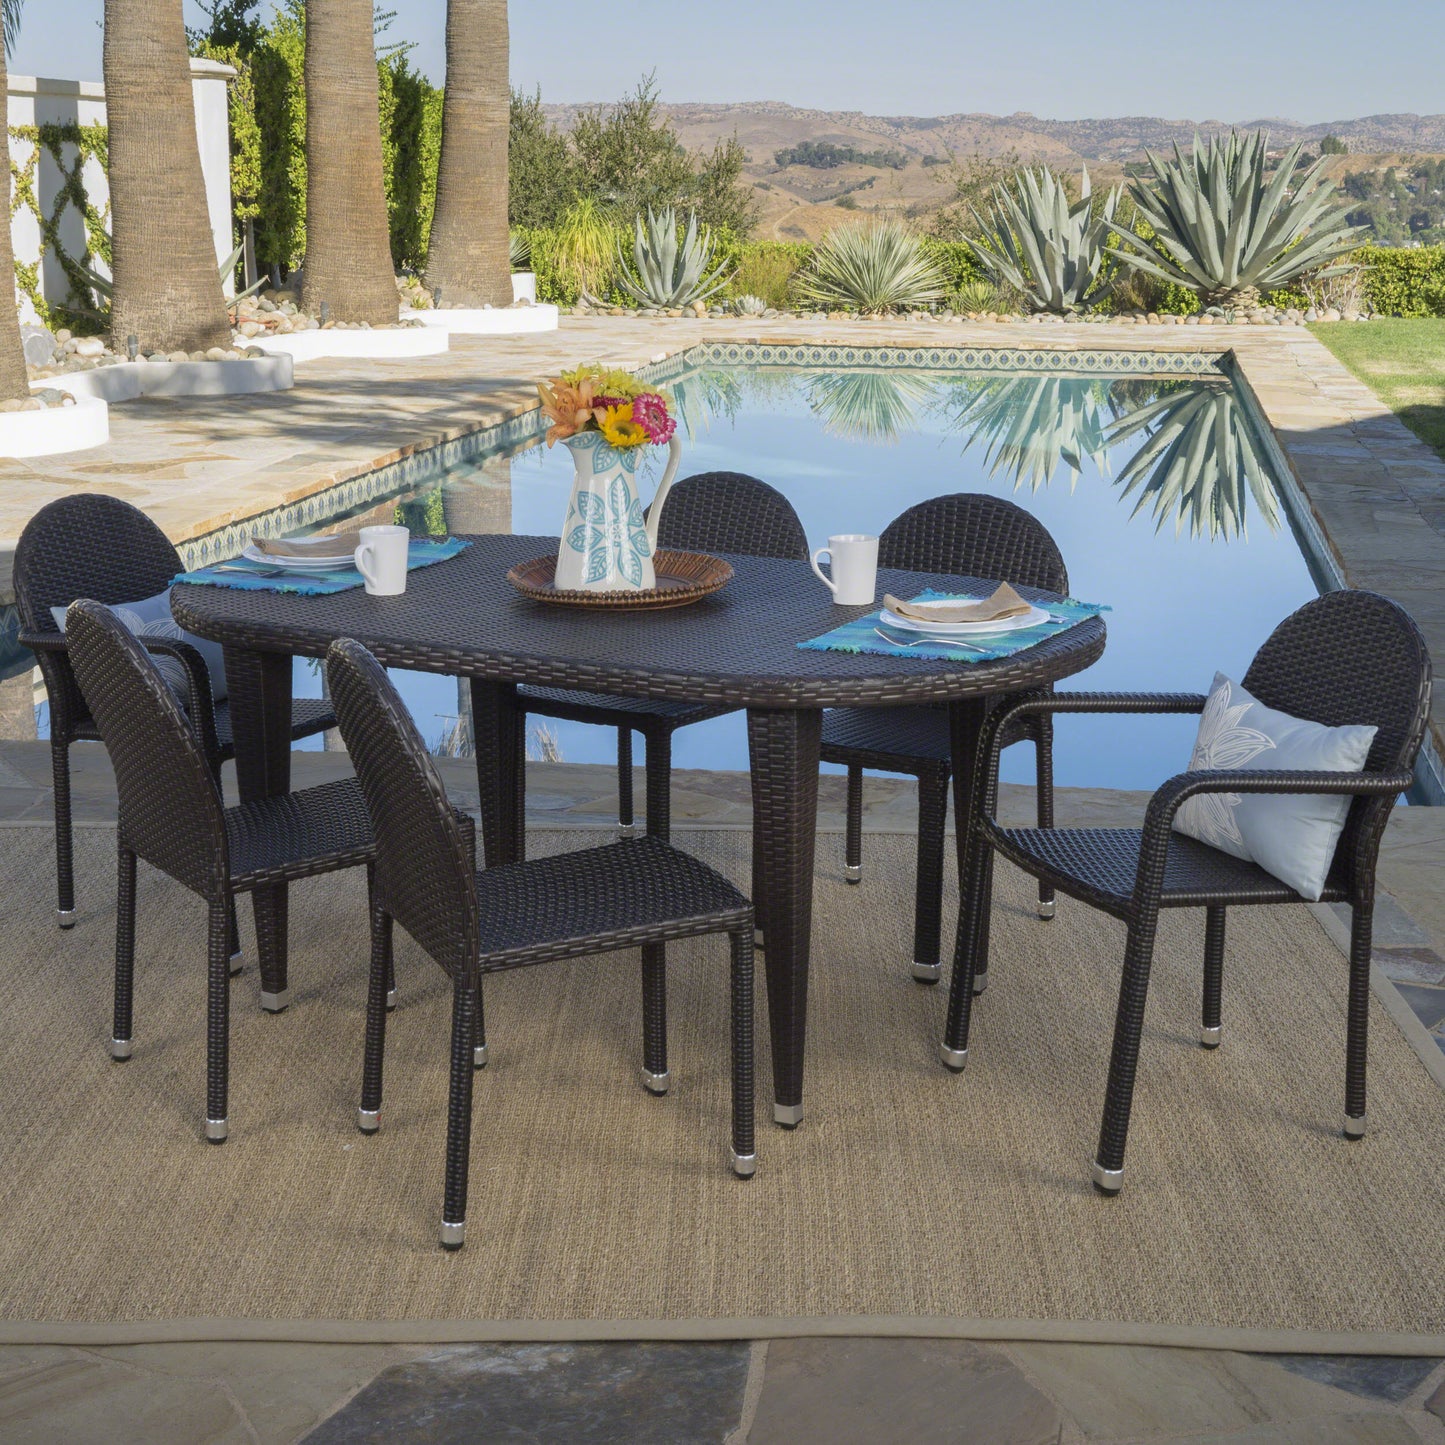 Ashlynn Outdoor 7 Piece Multi-brown Wicker Dining Set with Stacking Chairs